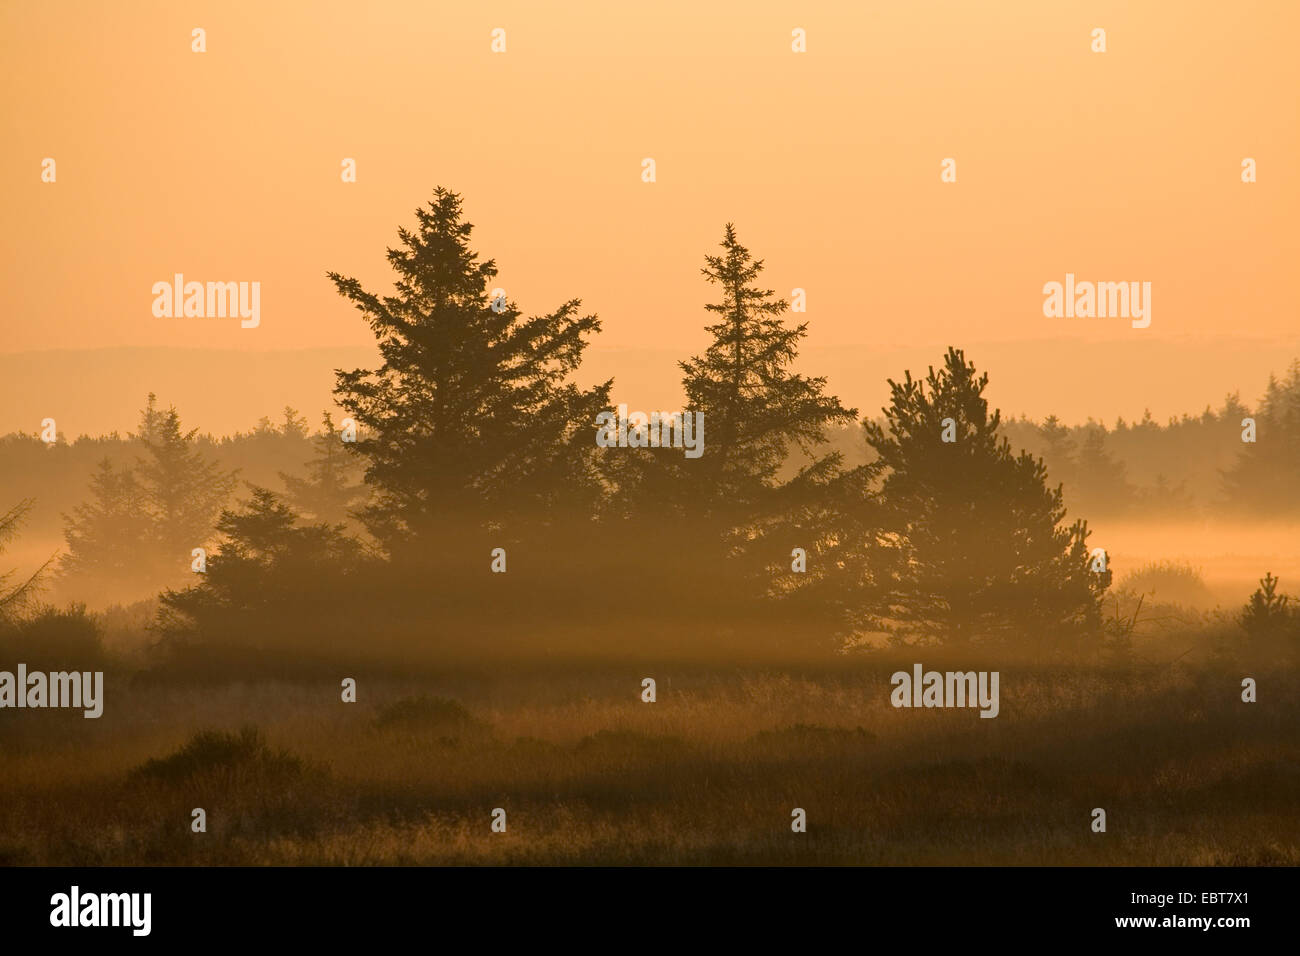 Norway spruce (Picea abies), spruce forest in the morning, Denmark, Midtjylland, Jylland Stock Photo